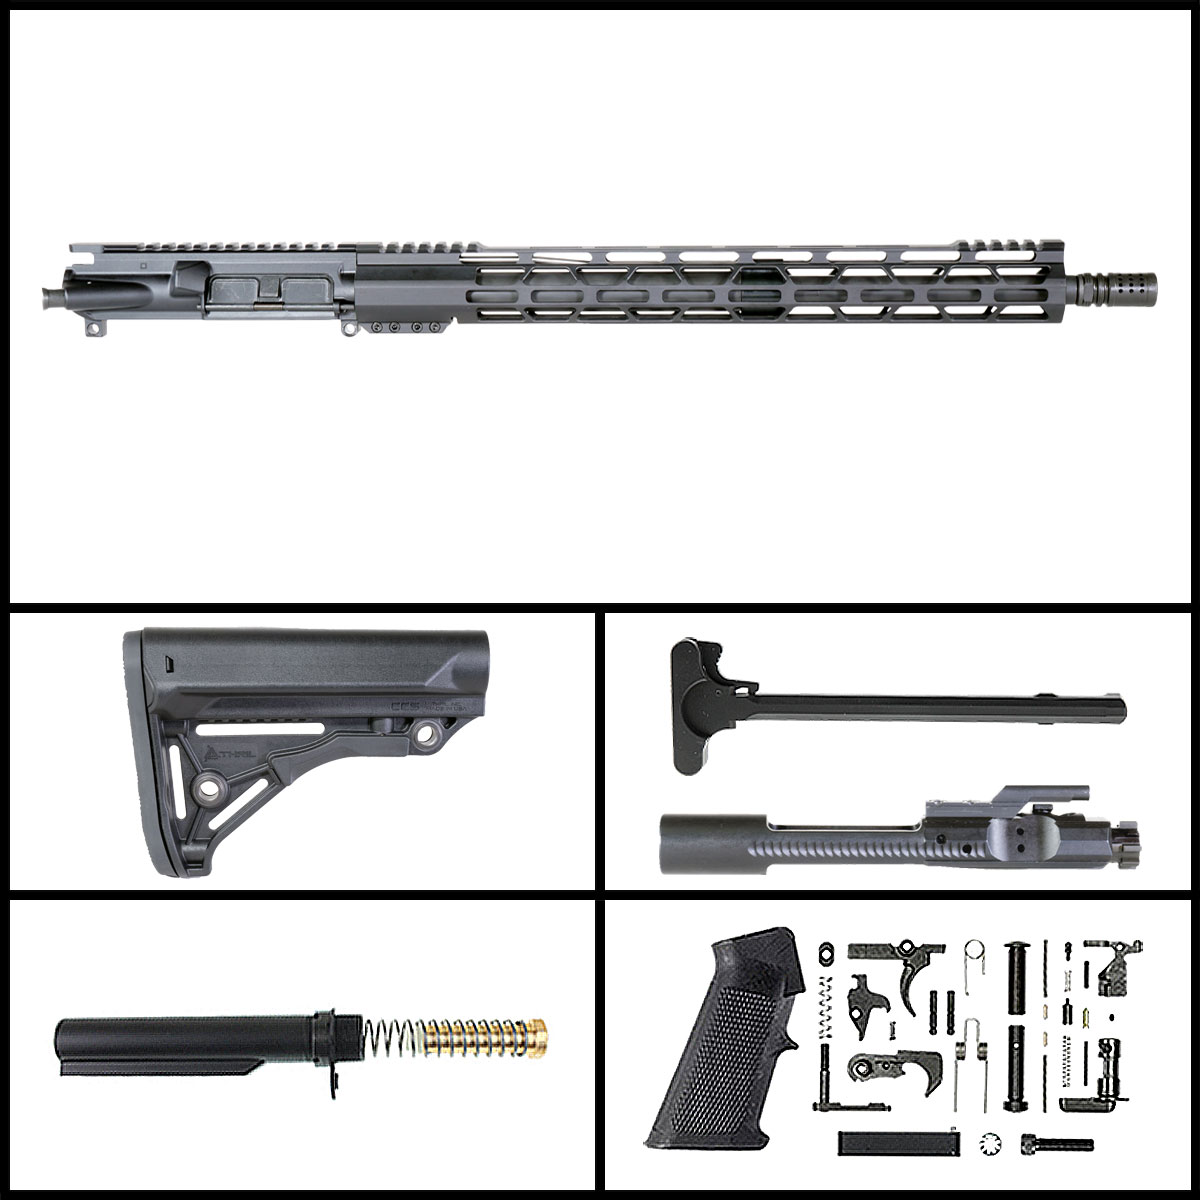 DDS 'Chaos Ultima' 18-inch AR-15 .450 Bushmaster Phosphate Rifle Full Build Kit